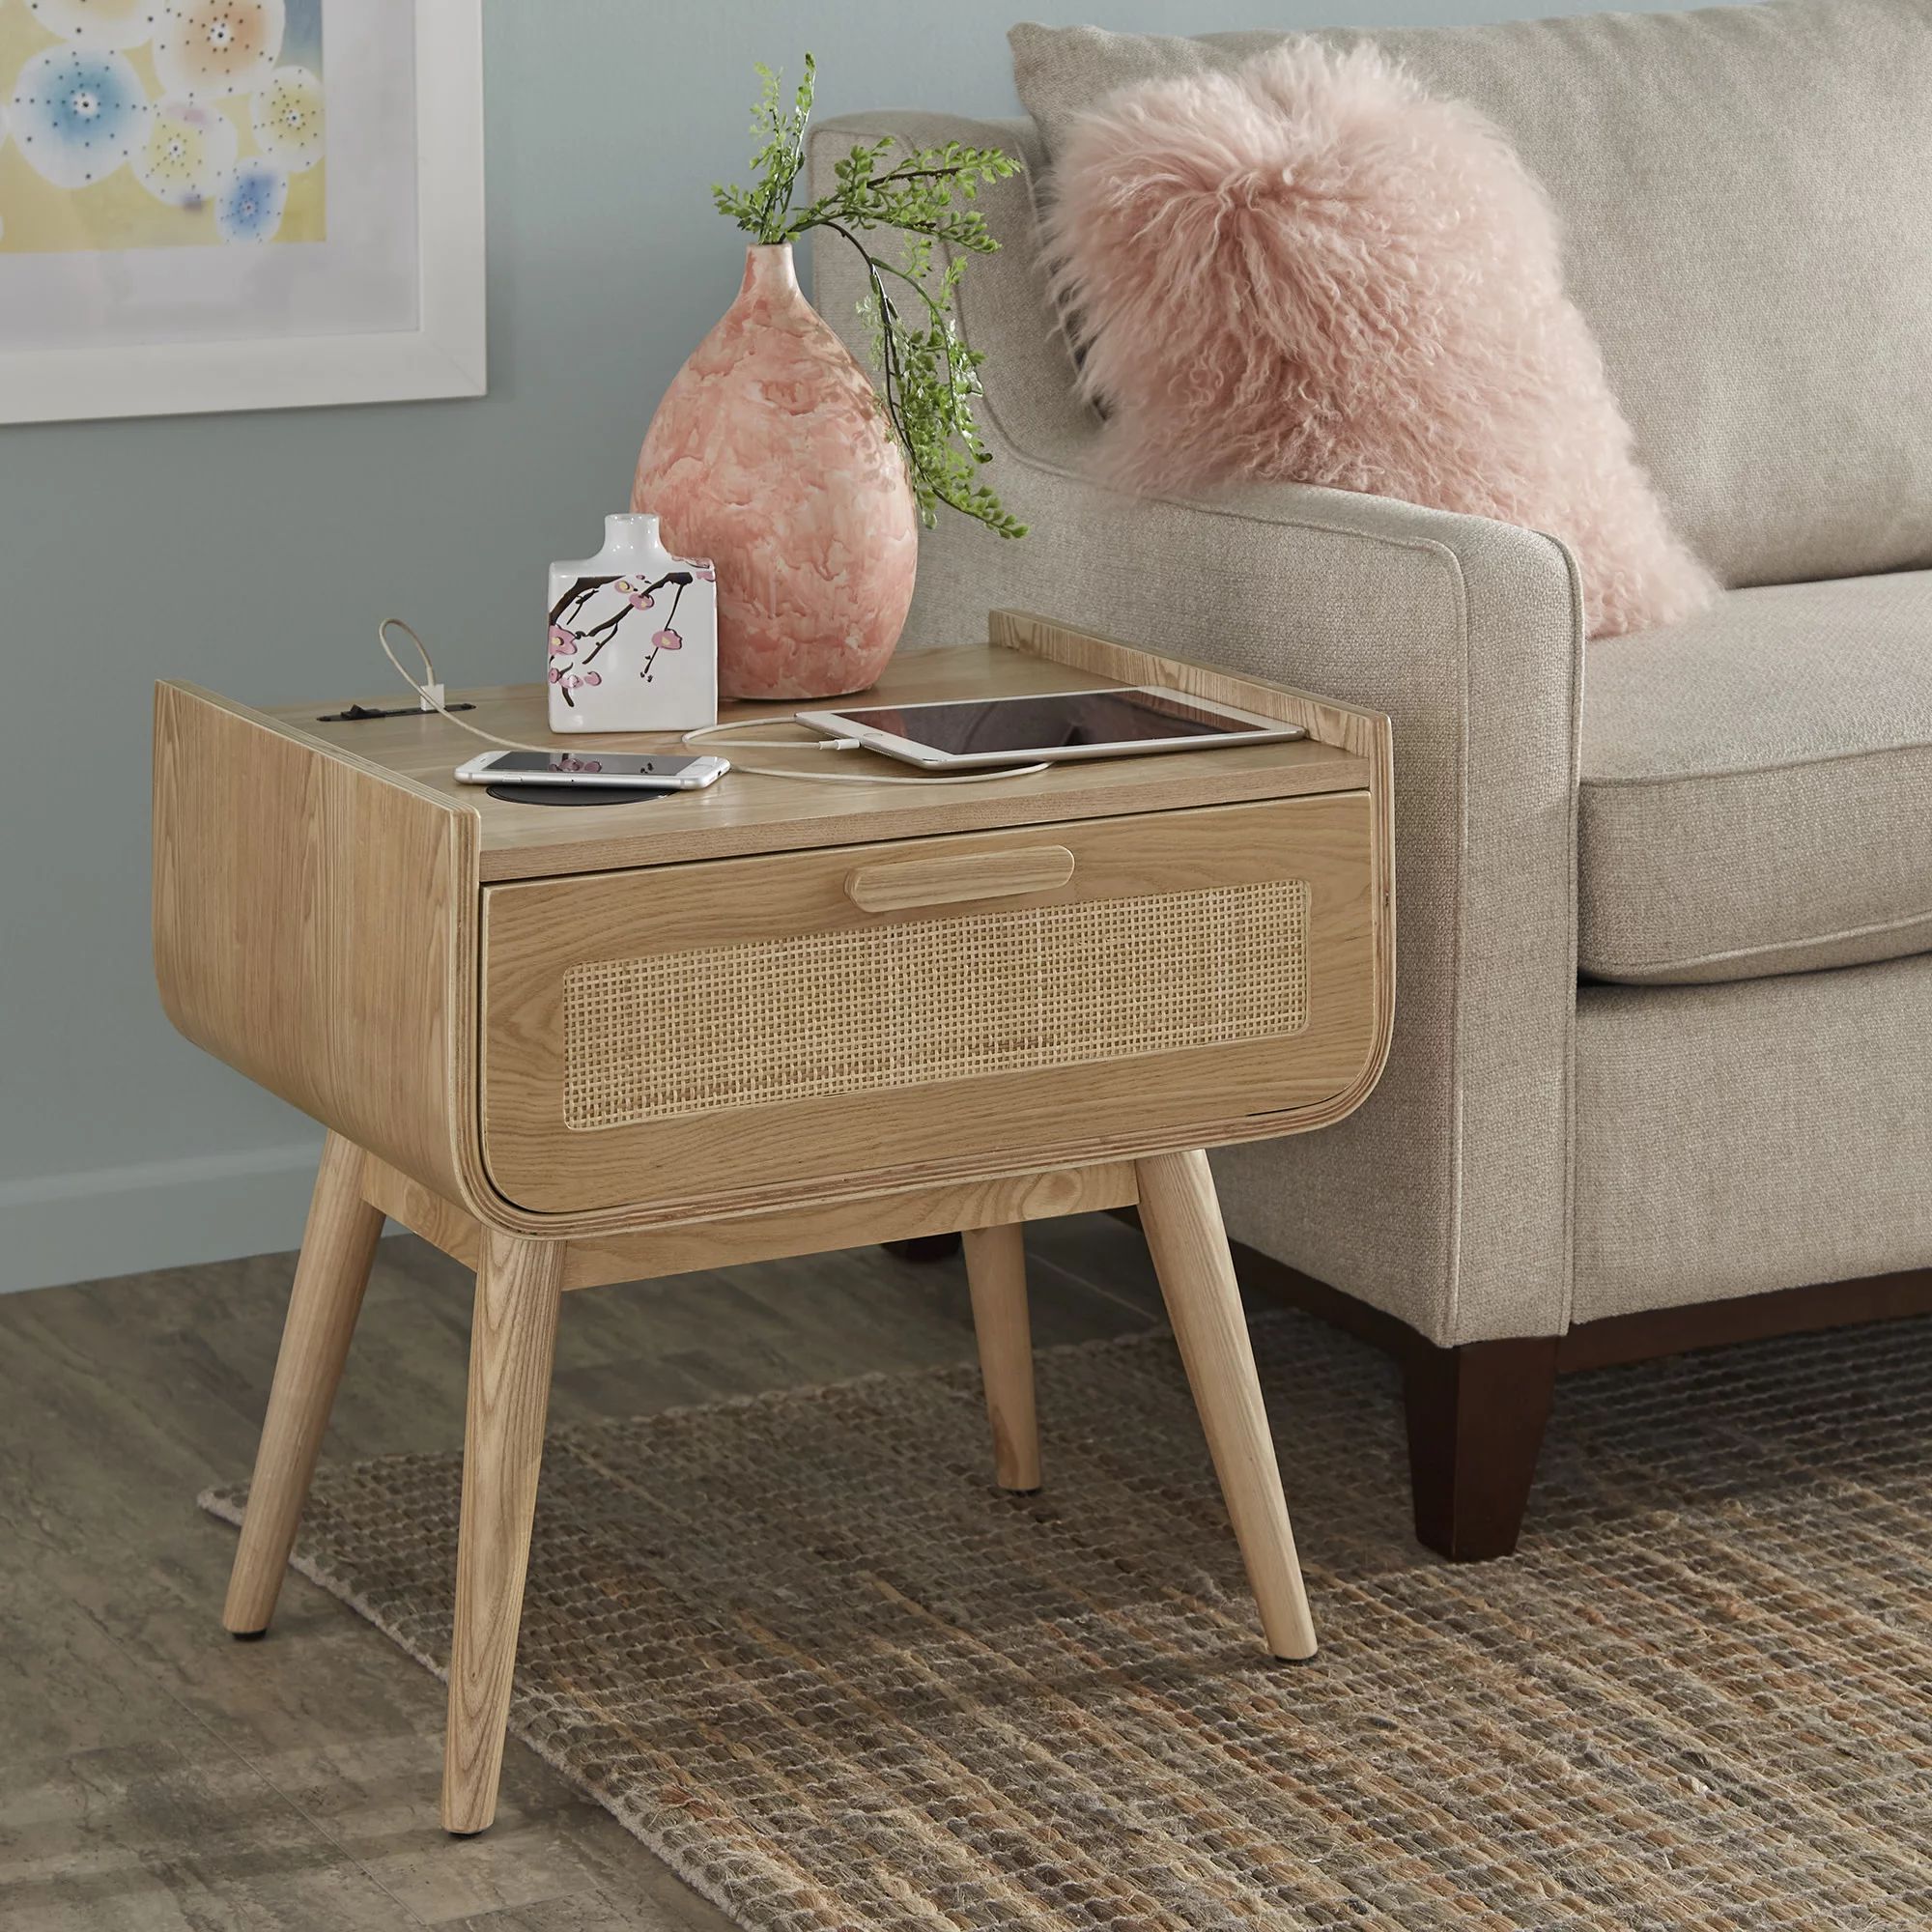 Desert Fields Cayleigh Wicker Front 1 Drawer End Table with Wireless Charger, Natural Finish - Wa... | Walmart (US)